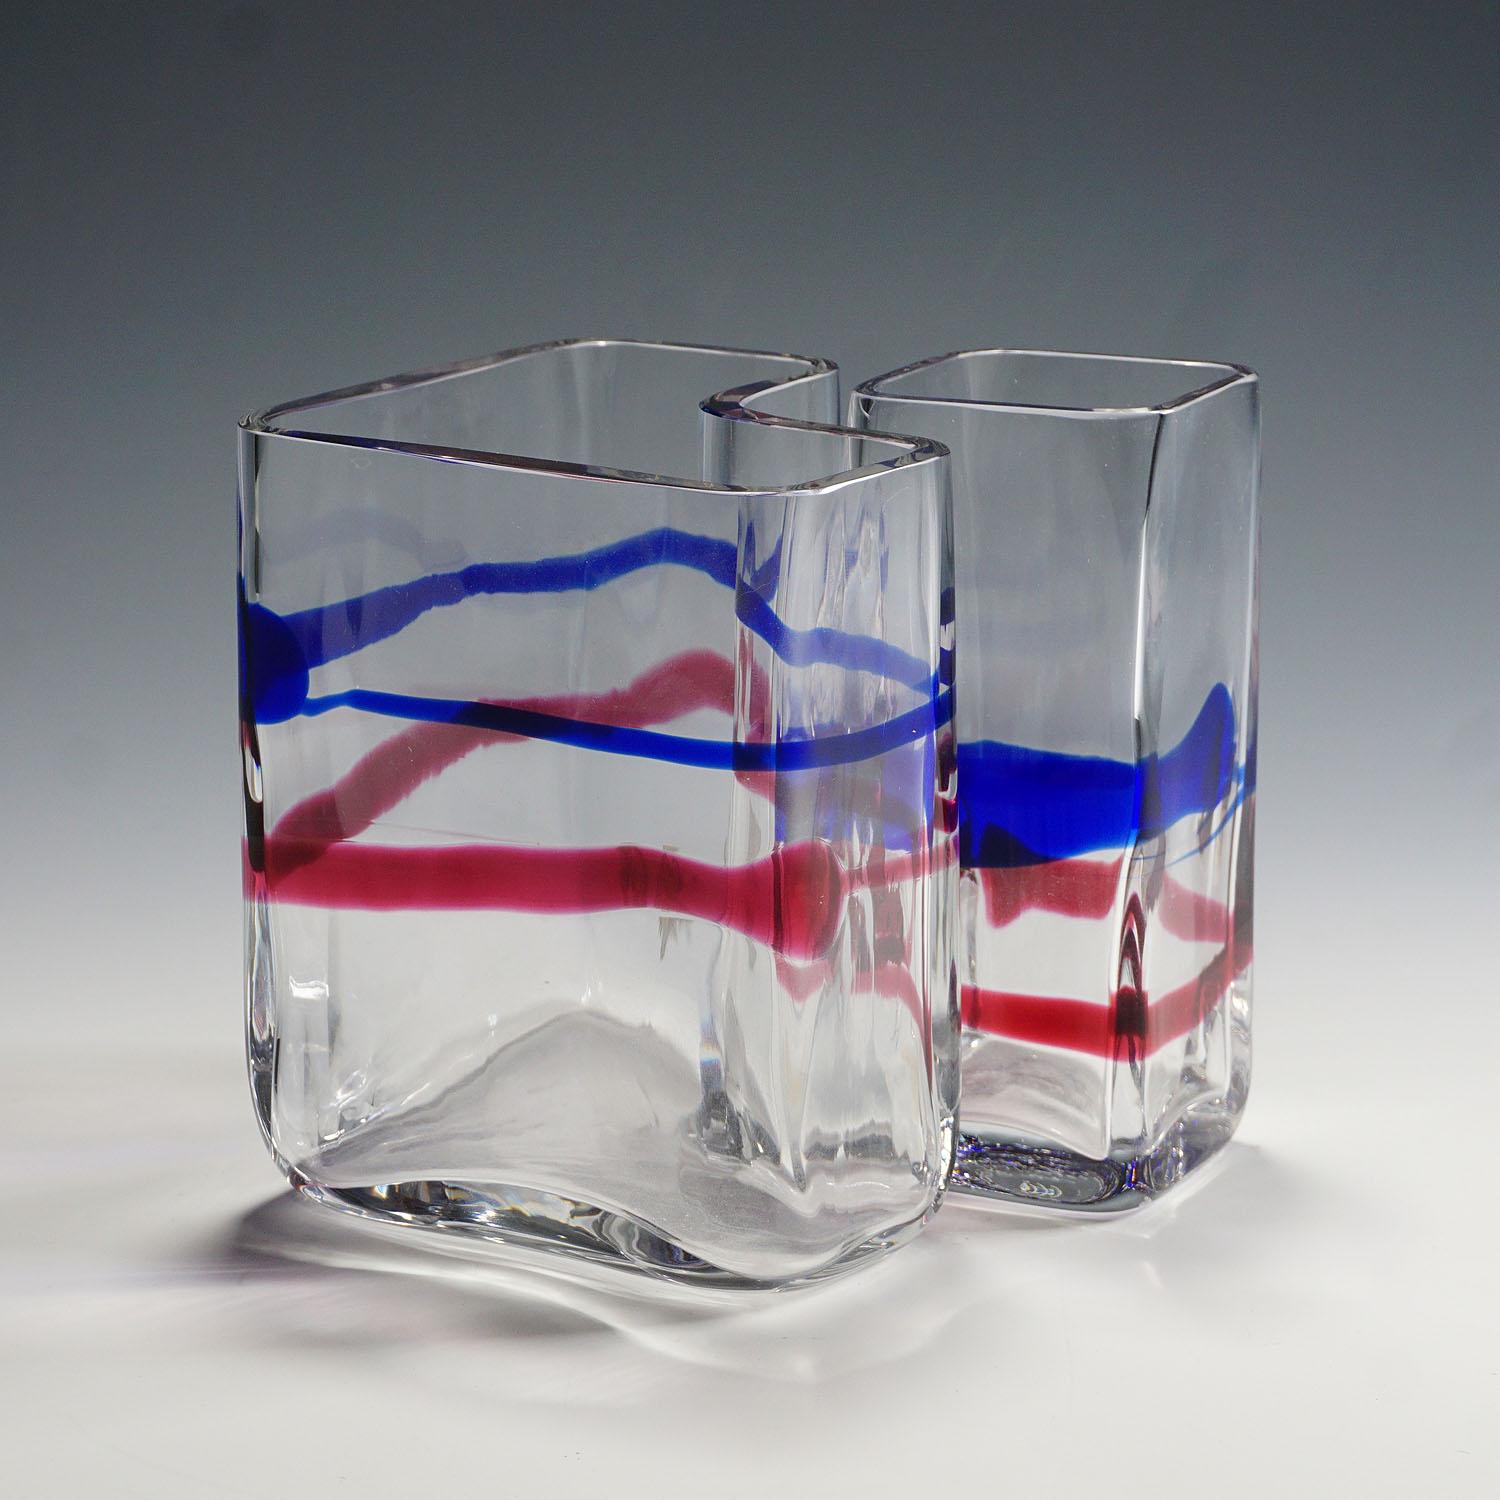 Pair of rectangular art glass vases designed by Erick Hoeglund for Vrigstad Glassworks ca. 1980s. Clear glass with fused ribbons in red and blue. Marked with company lable and signature on the base: 'Vrigstad Kristallhytta Erik Hoeglund' and model